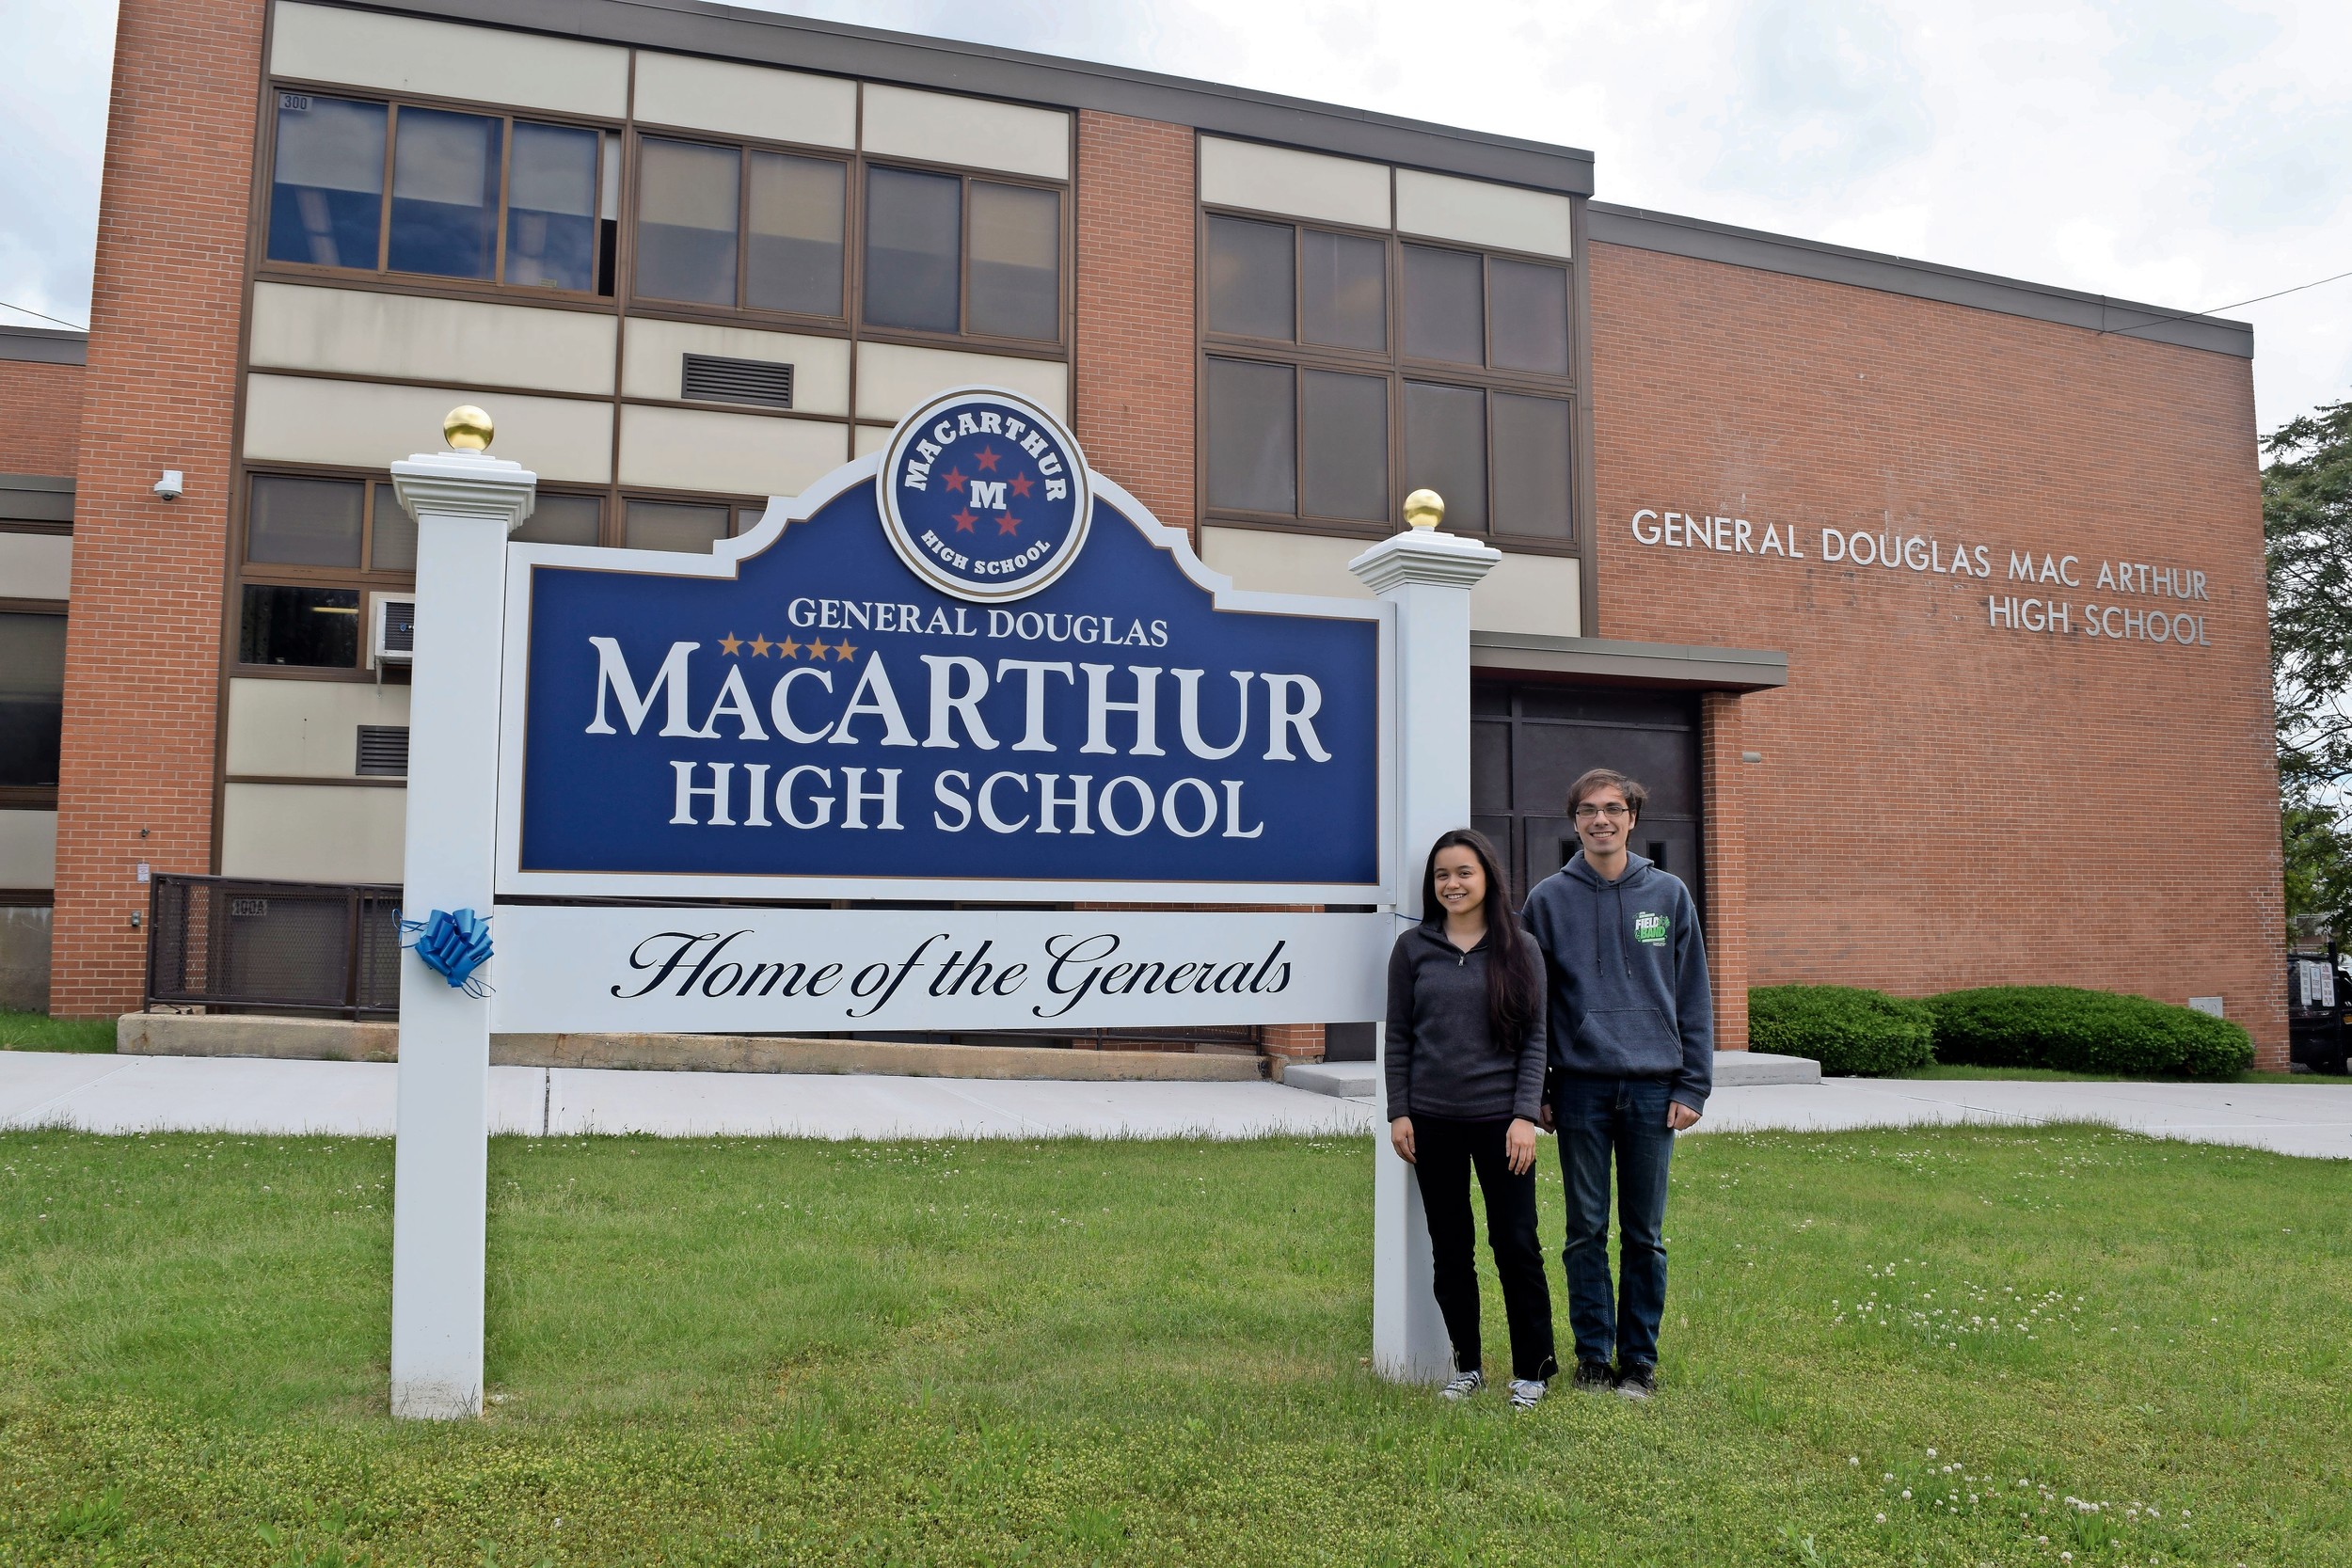 Casey Butcher and James May are the valedictorian and salutatorian of MacArthur High School’s class of 2017.